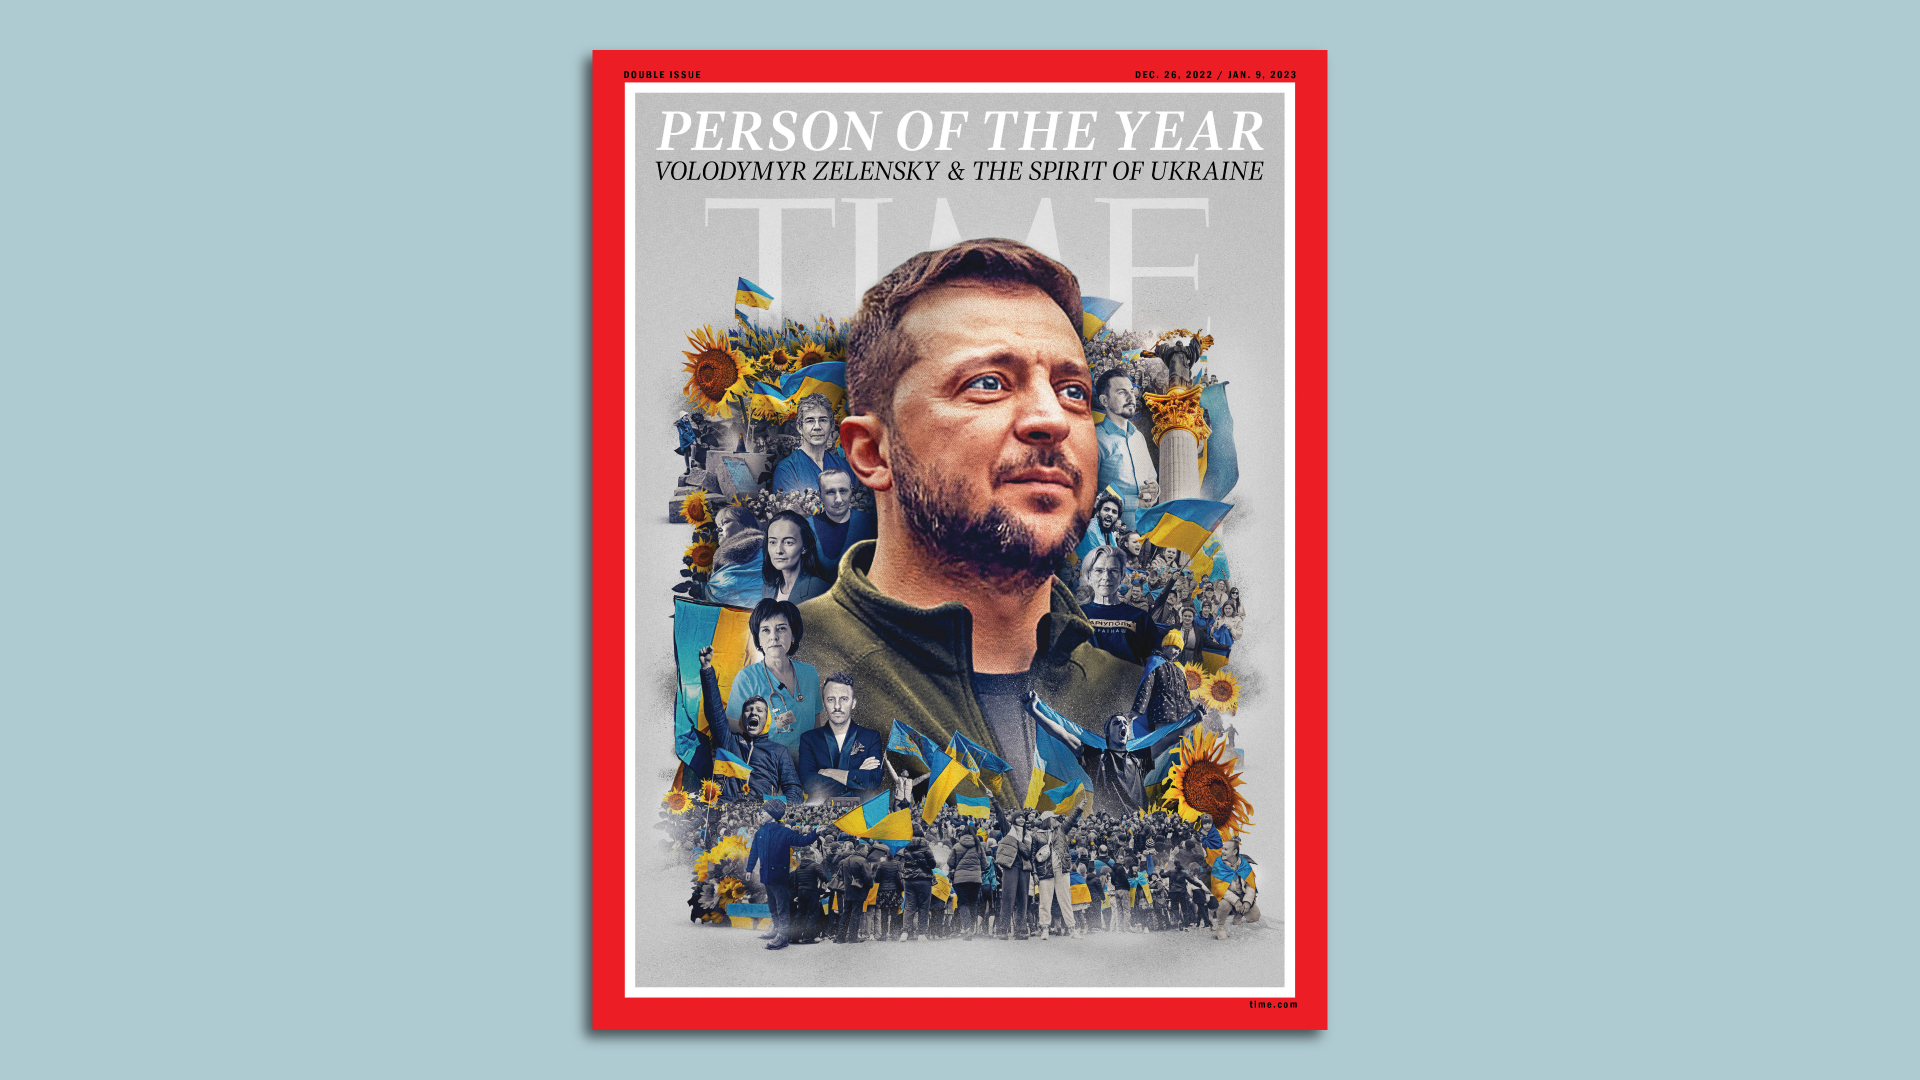 TIME magazine cover featuring Volodymyr Zelensky as person of the year